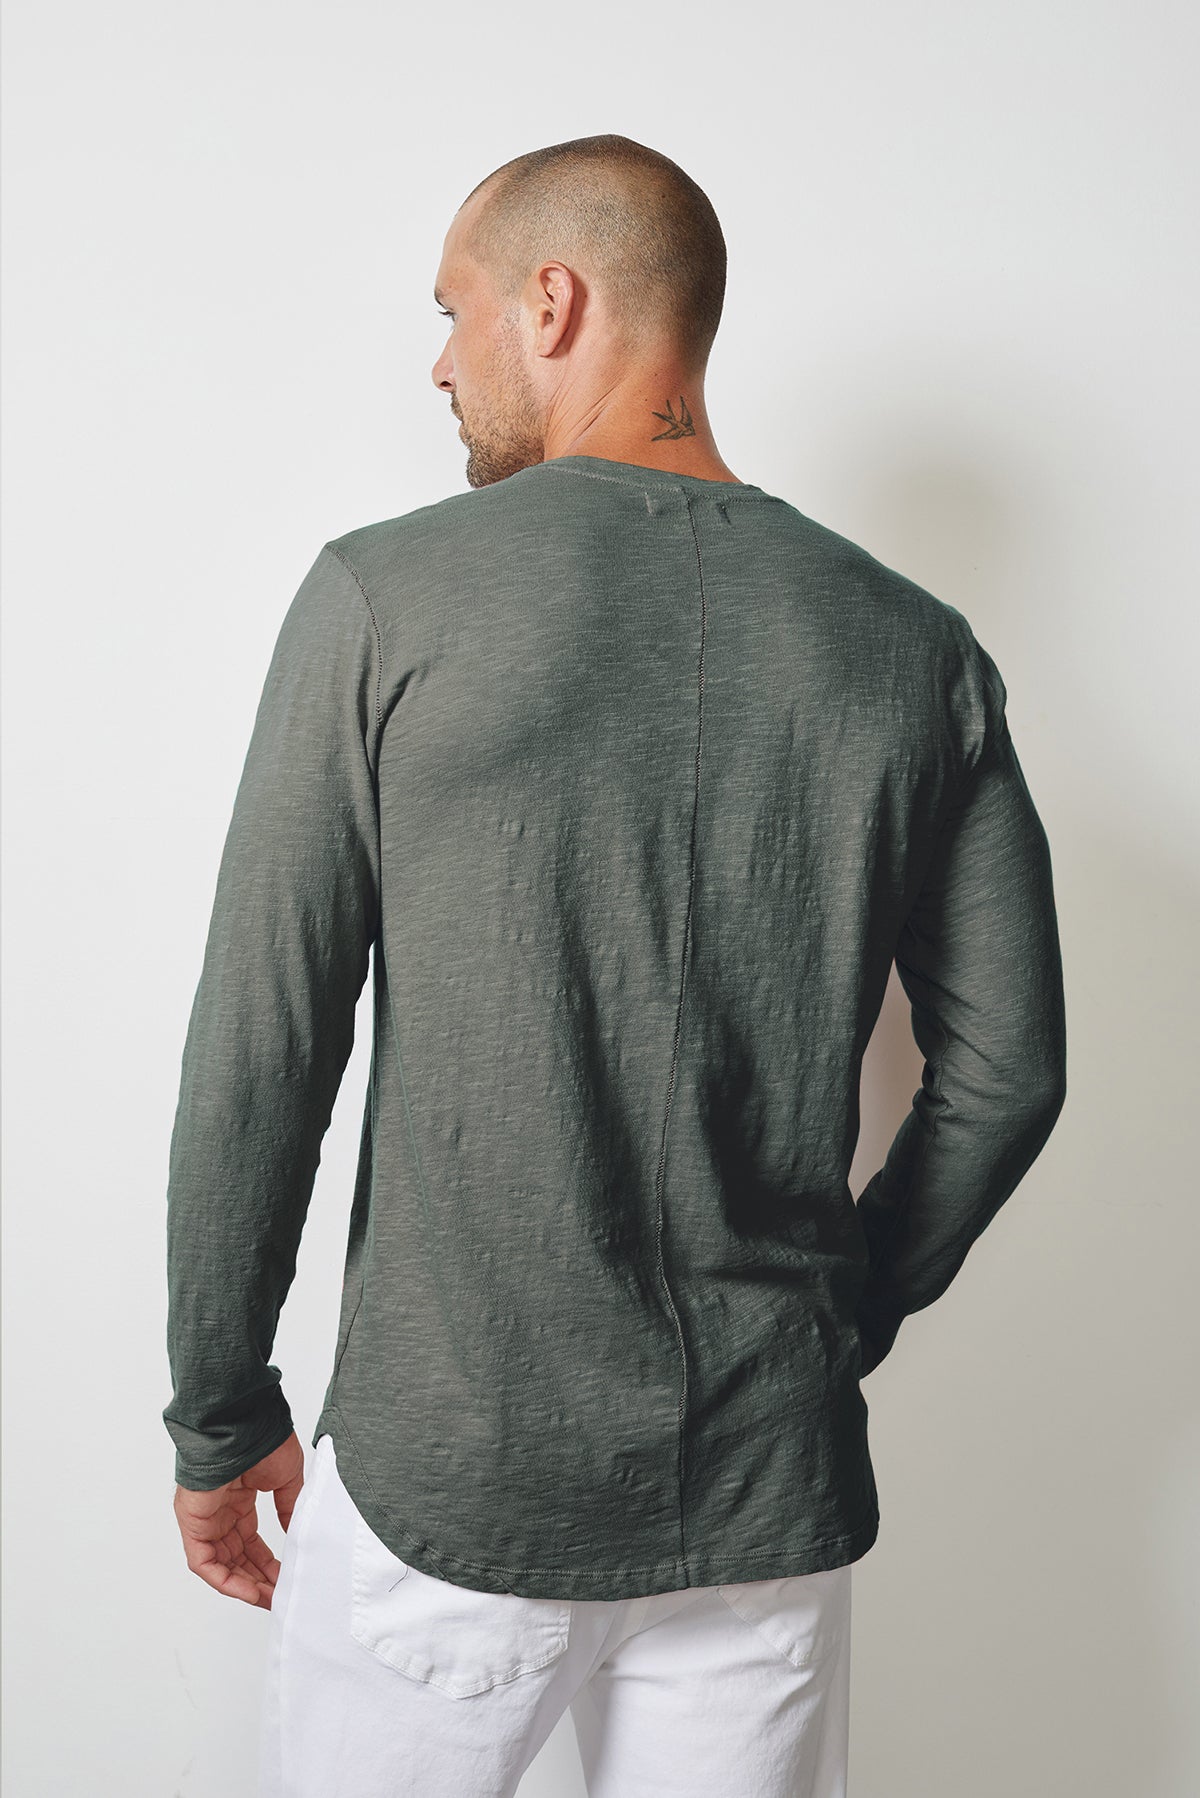 The back view of a man wearing a Velvet by Graham & Spencer CHANCE CREW NECK TEE.-14905793806529